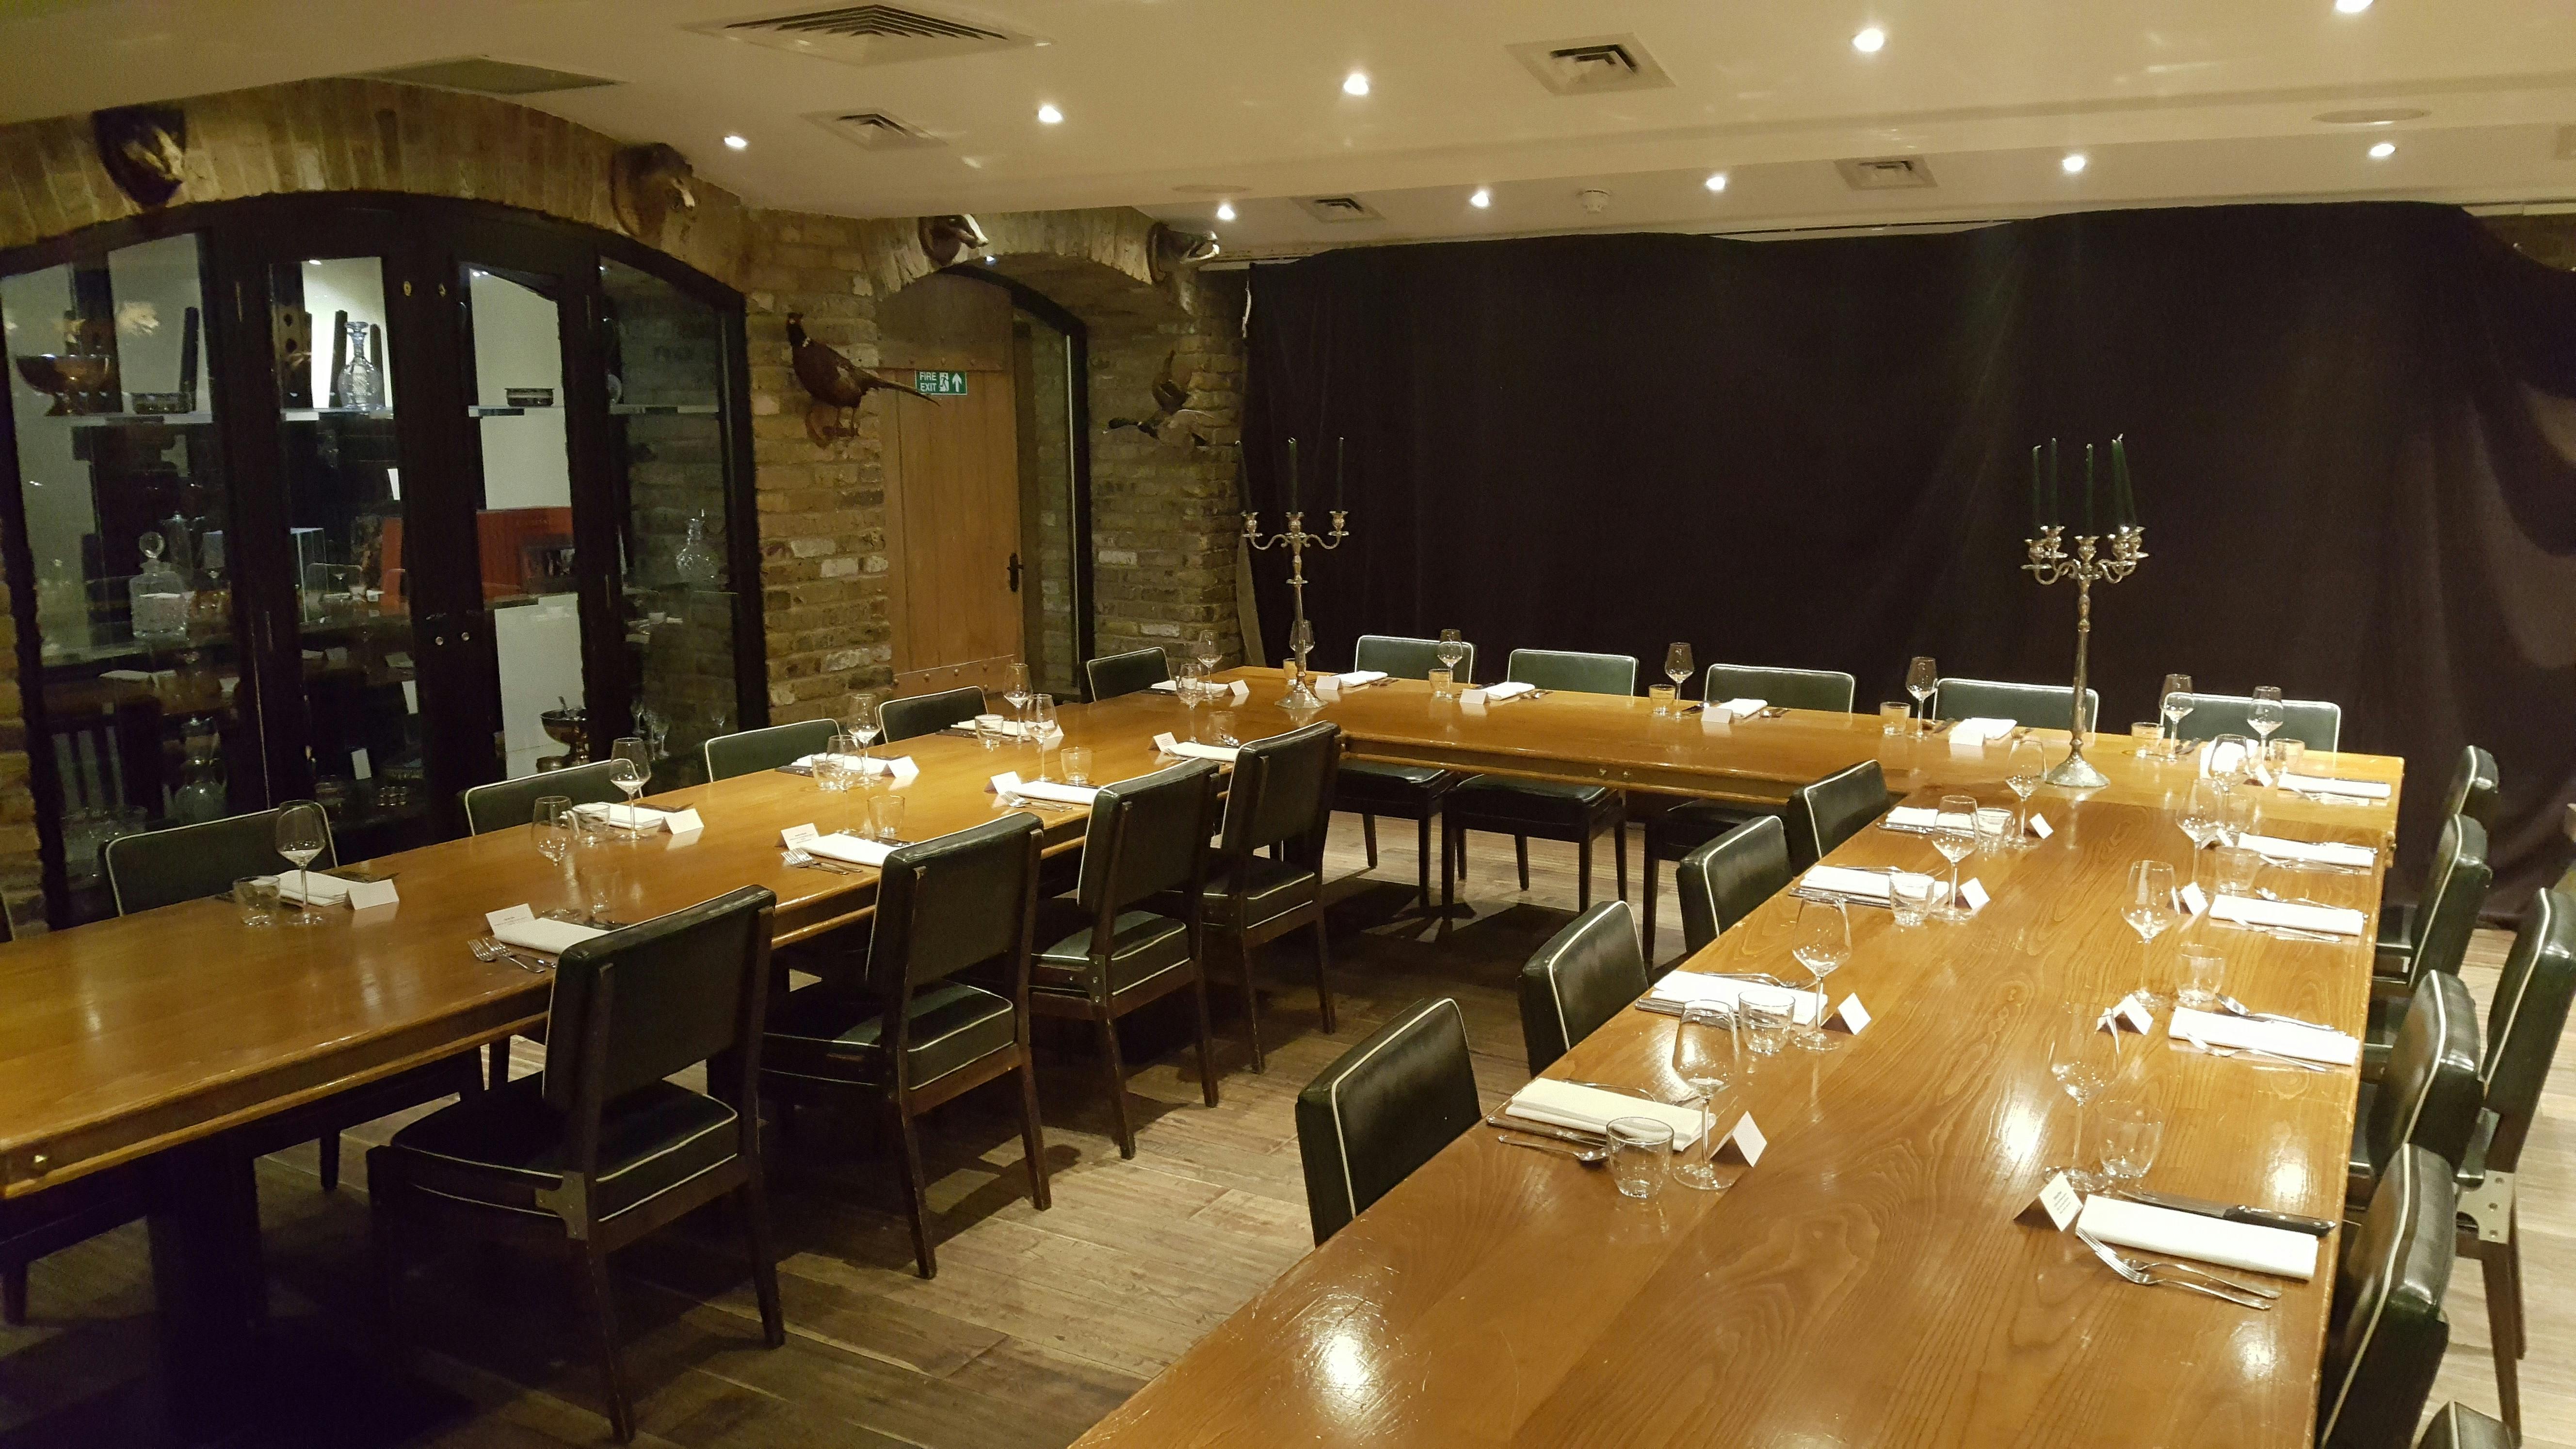 Birthday Party Venues - The Jugged Hare